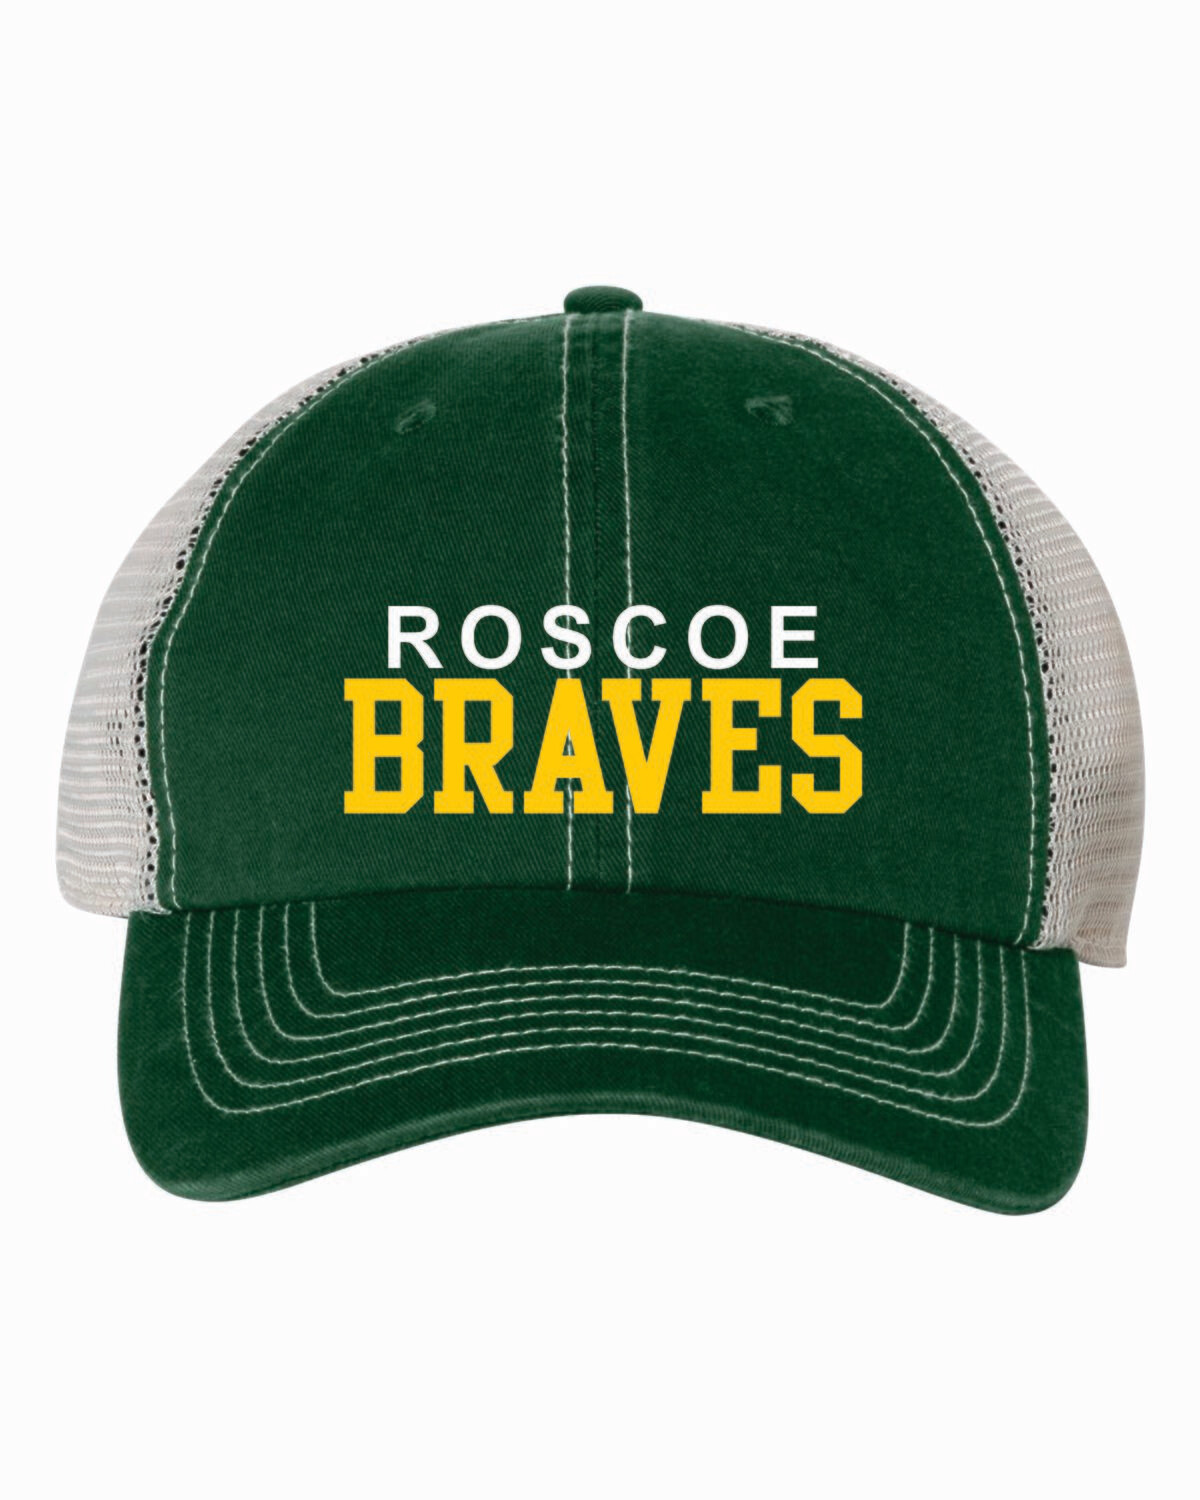 ROSCOE BRAVES Mesh Back Adjustable Cap, Embroidered, 3 Colors Available